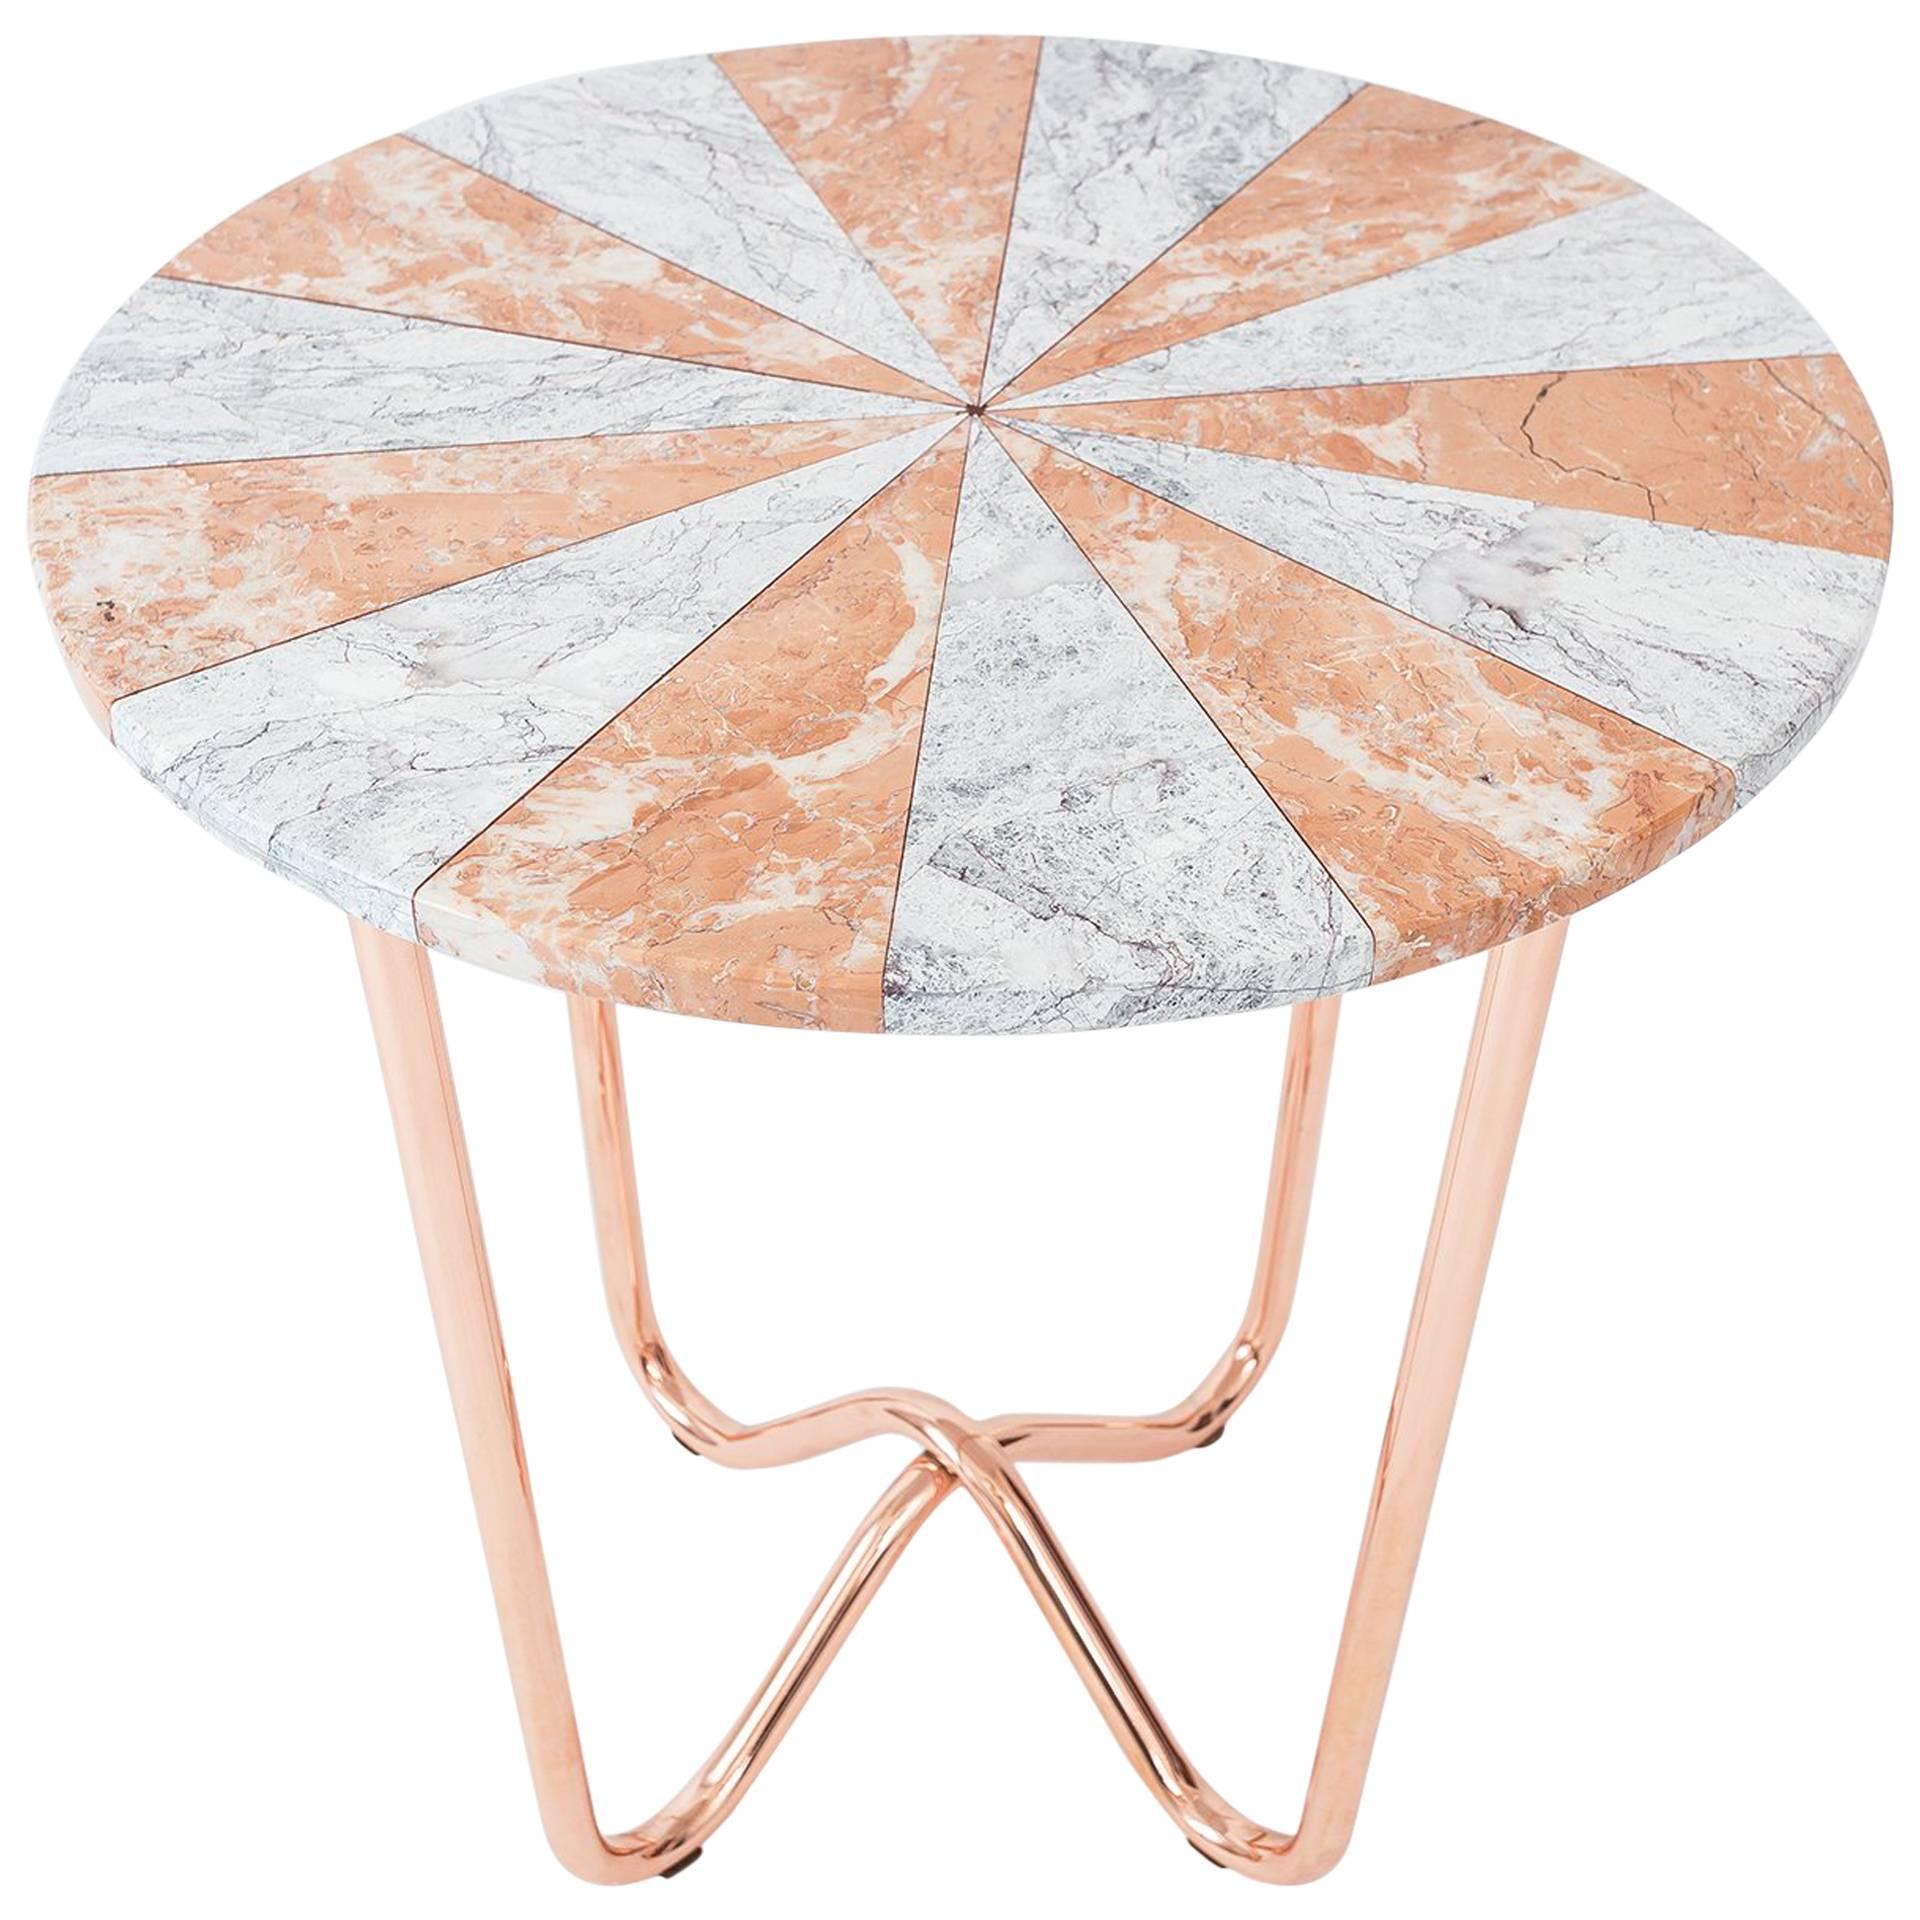 Jasmine Pizza Side Table in Diana rose and dream grey marble and copper legs. For Sale